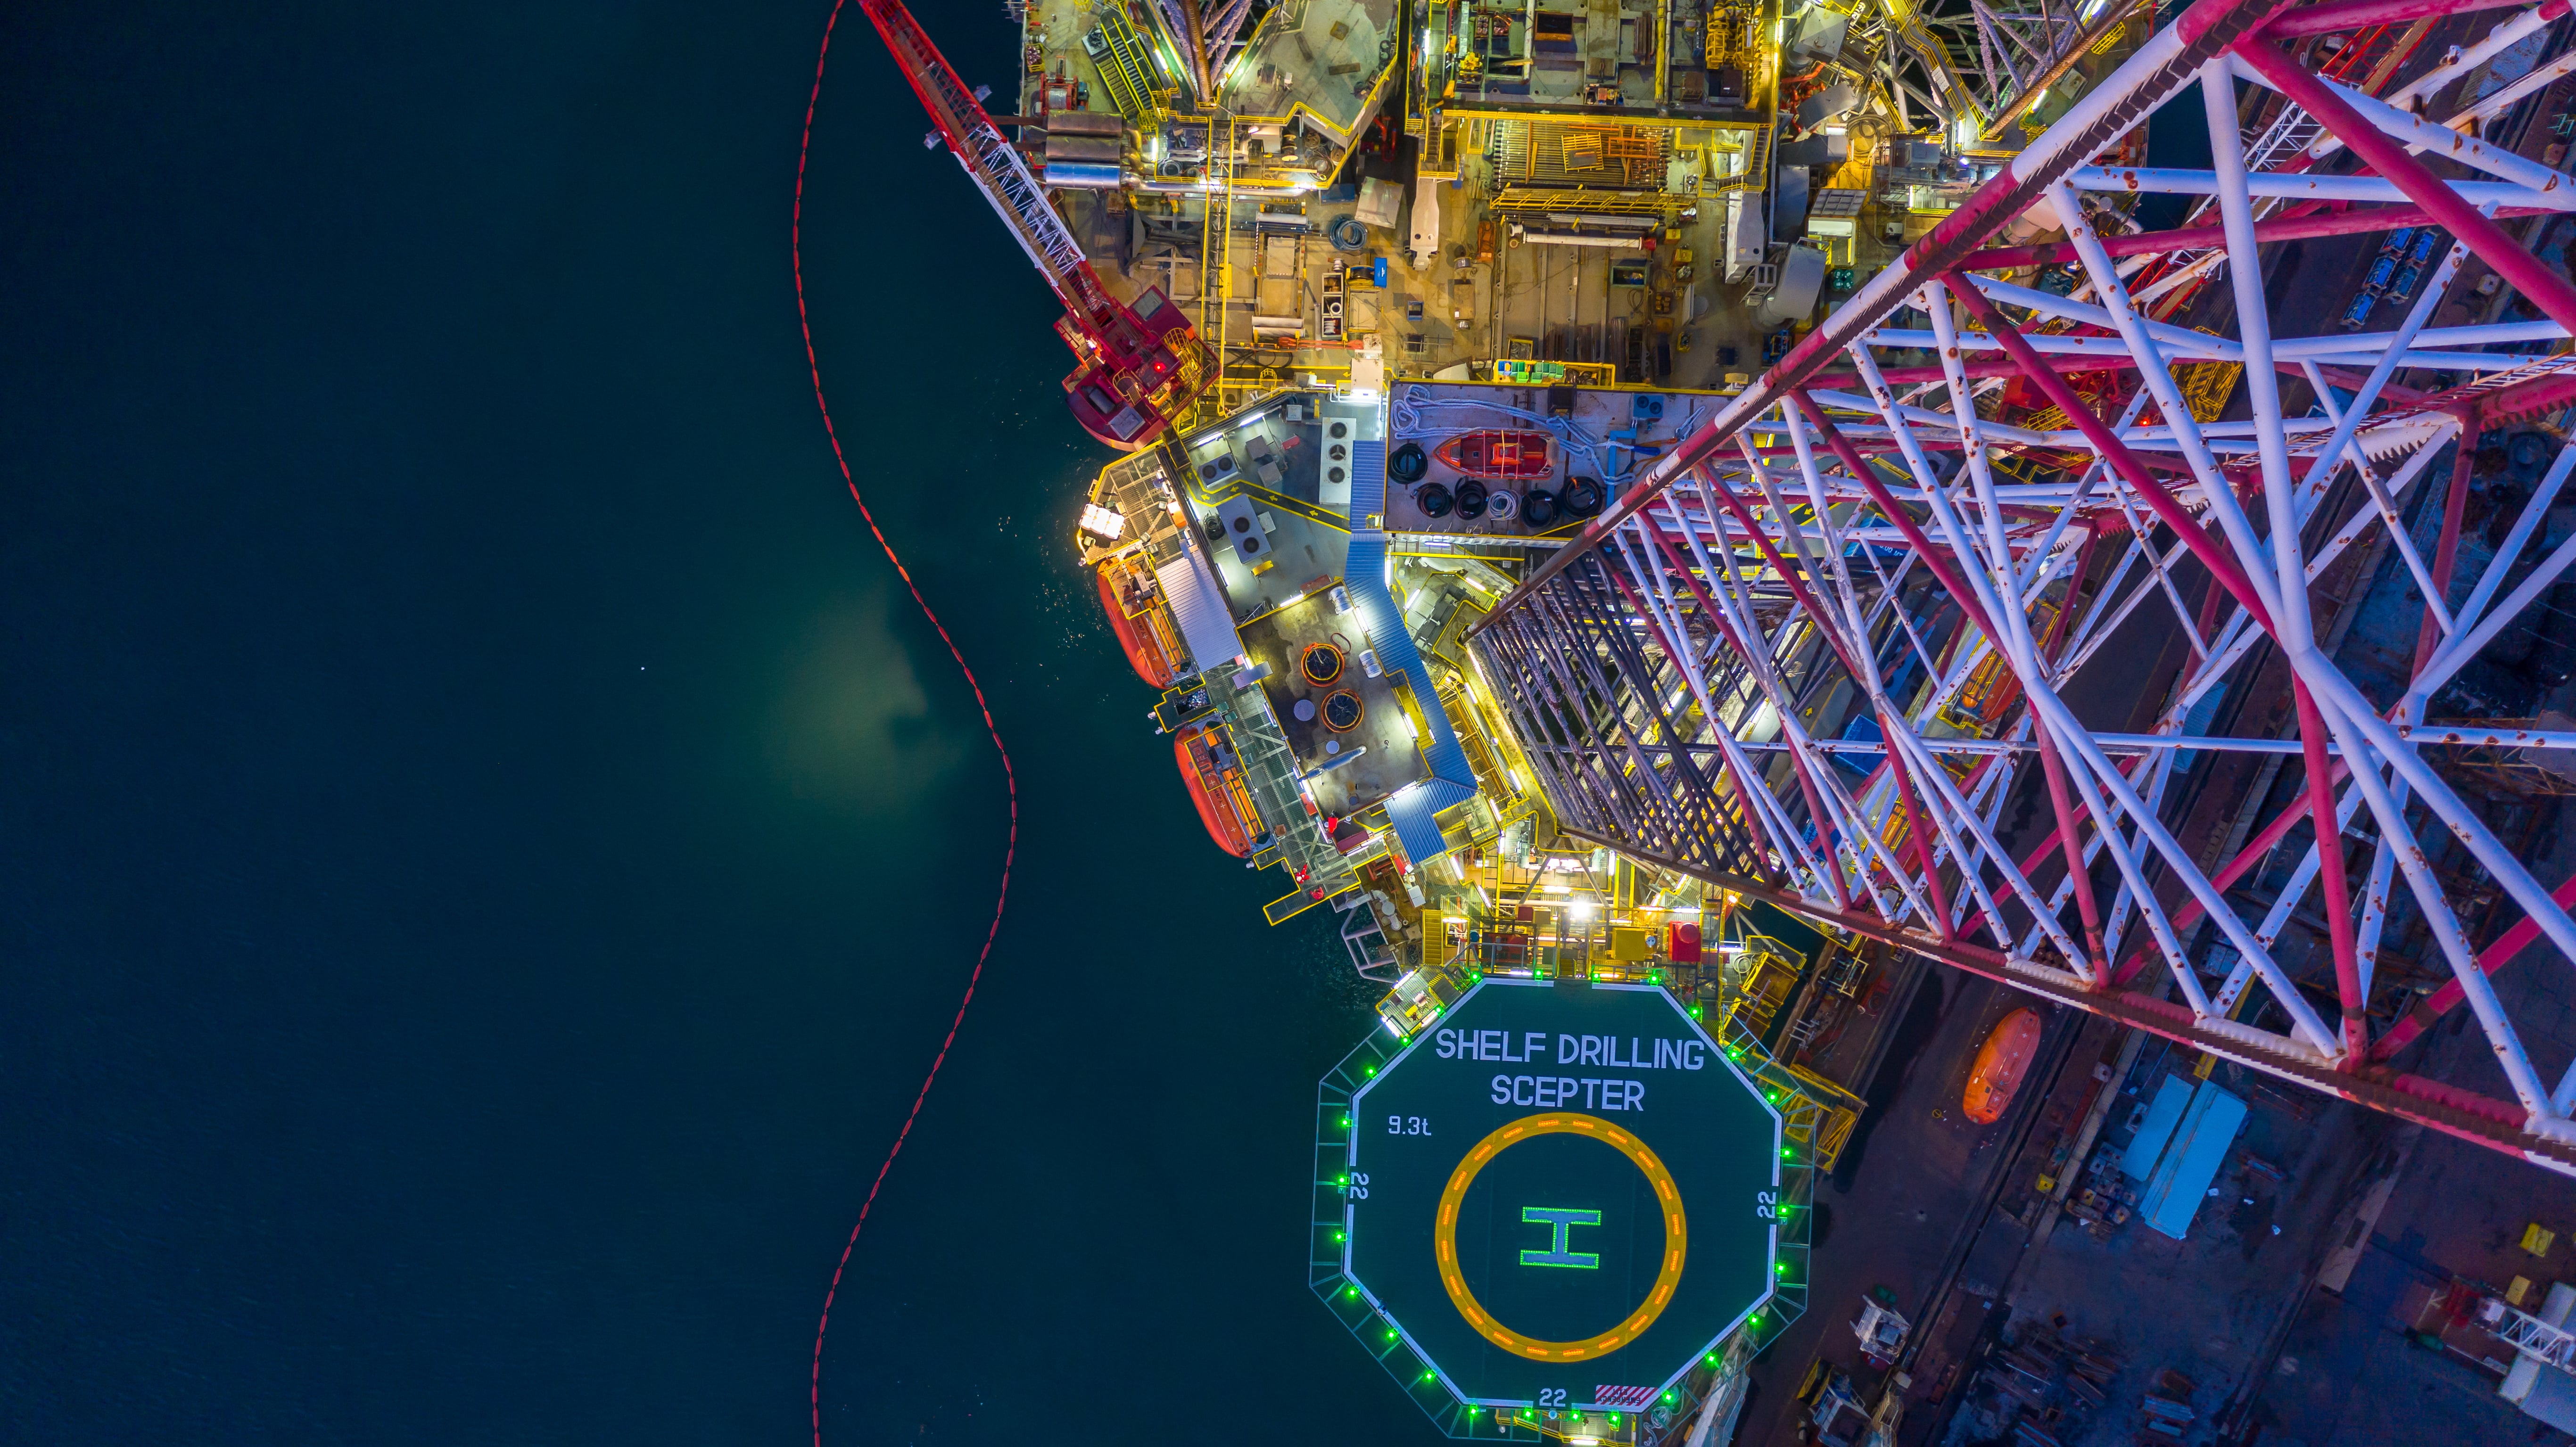 aireal view of a helicopter pad at the end of a offshore platform